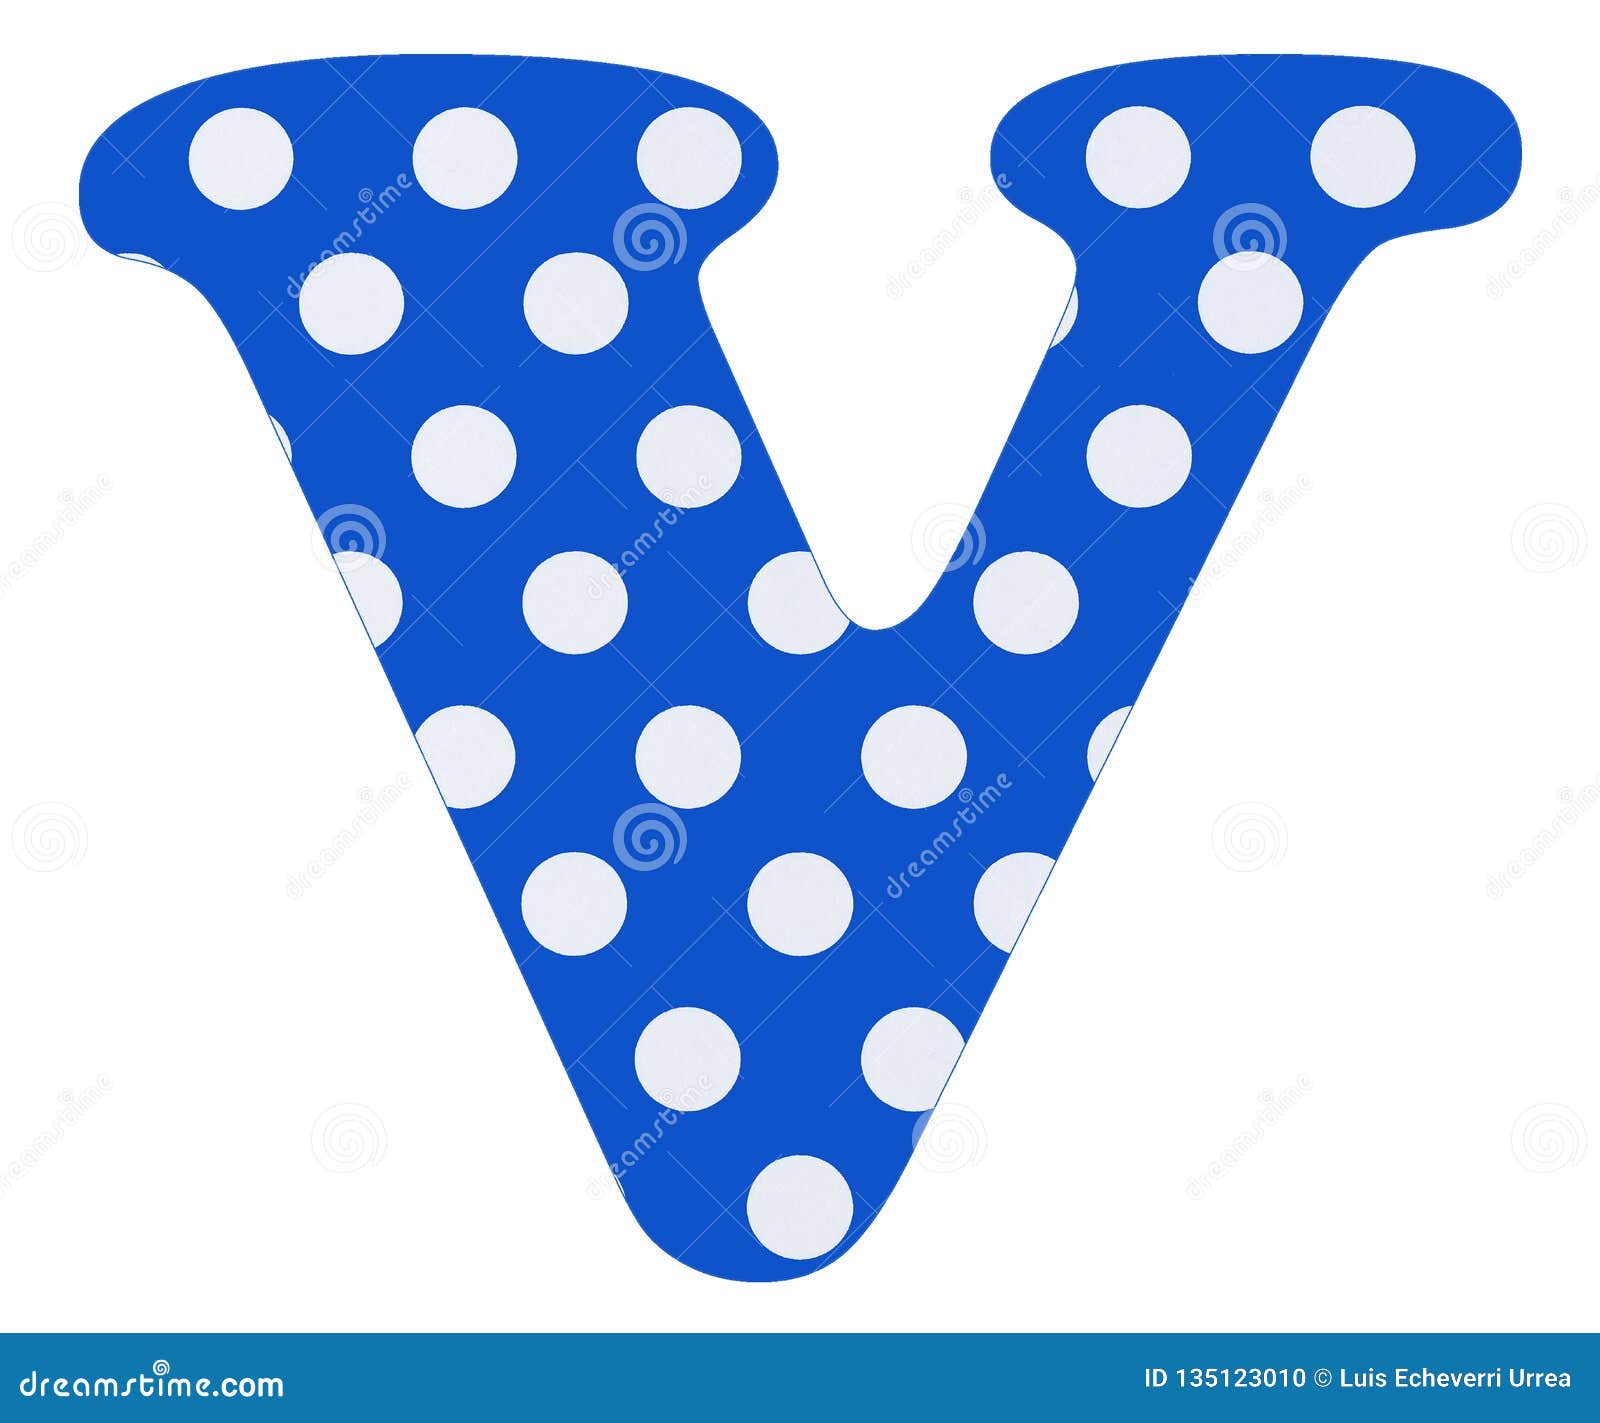 Letter V White Circles On Blue Background Top View Stock Illustration Illustration Of Isolated Numbers